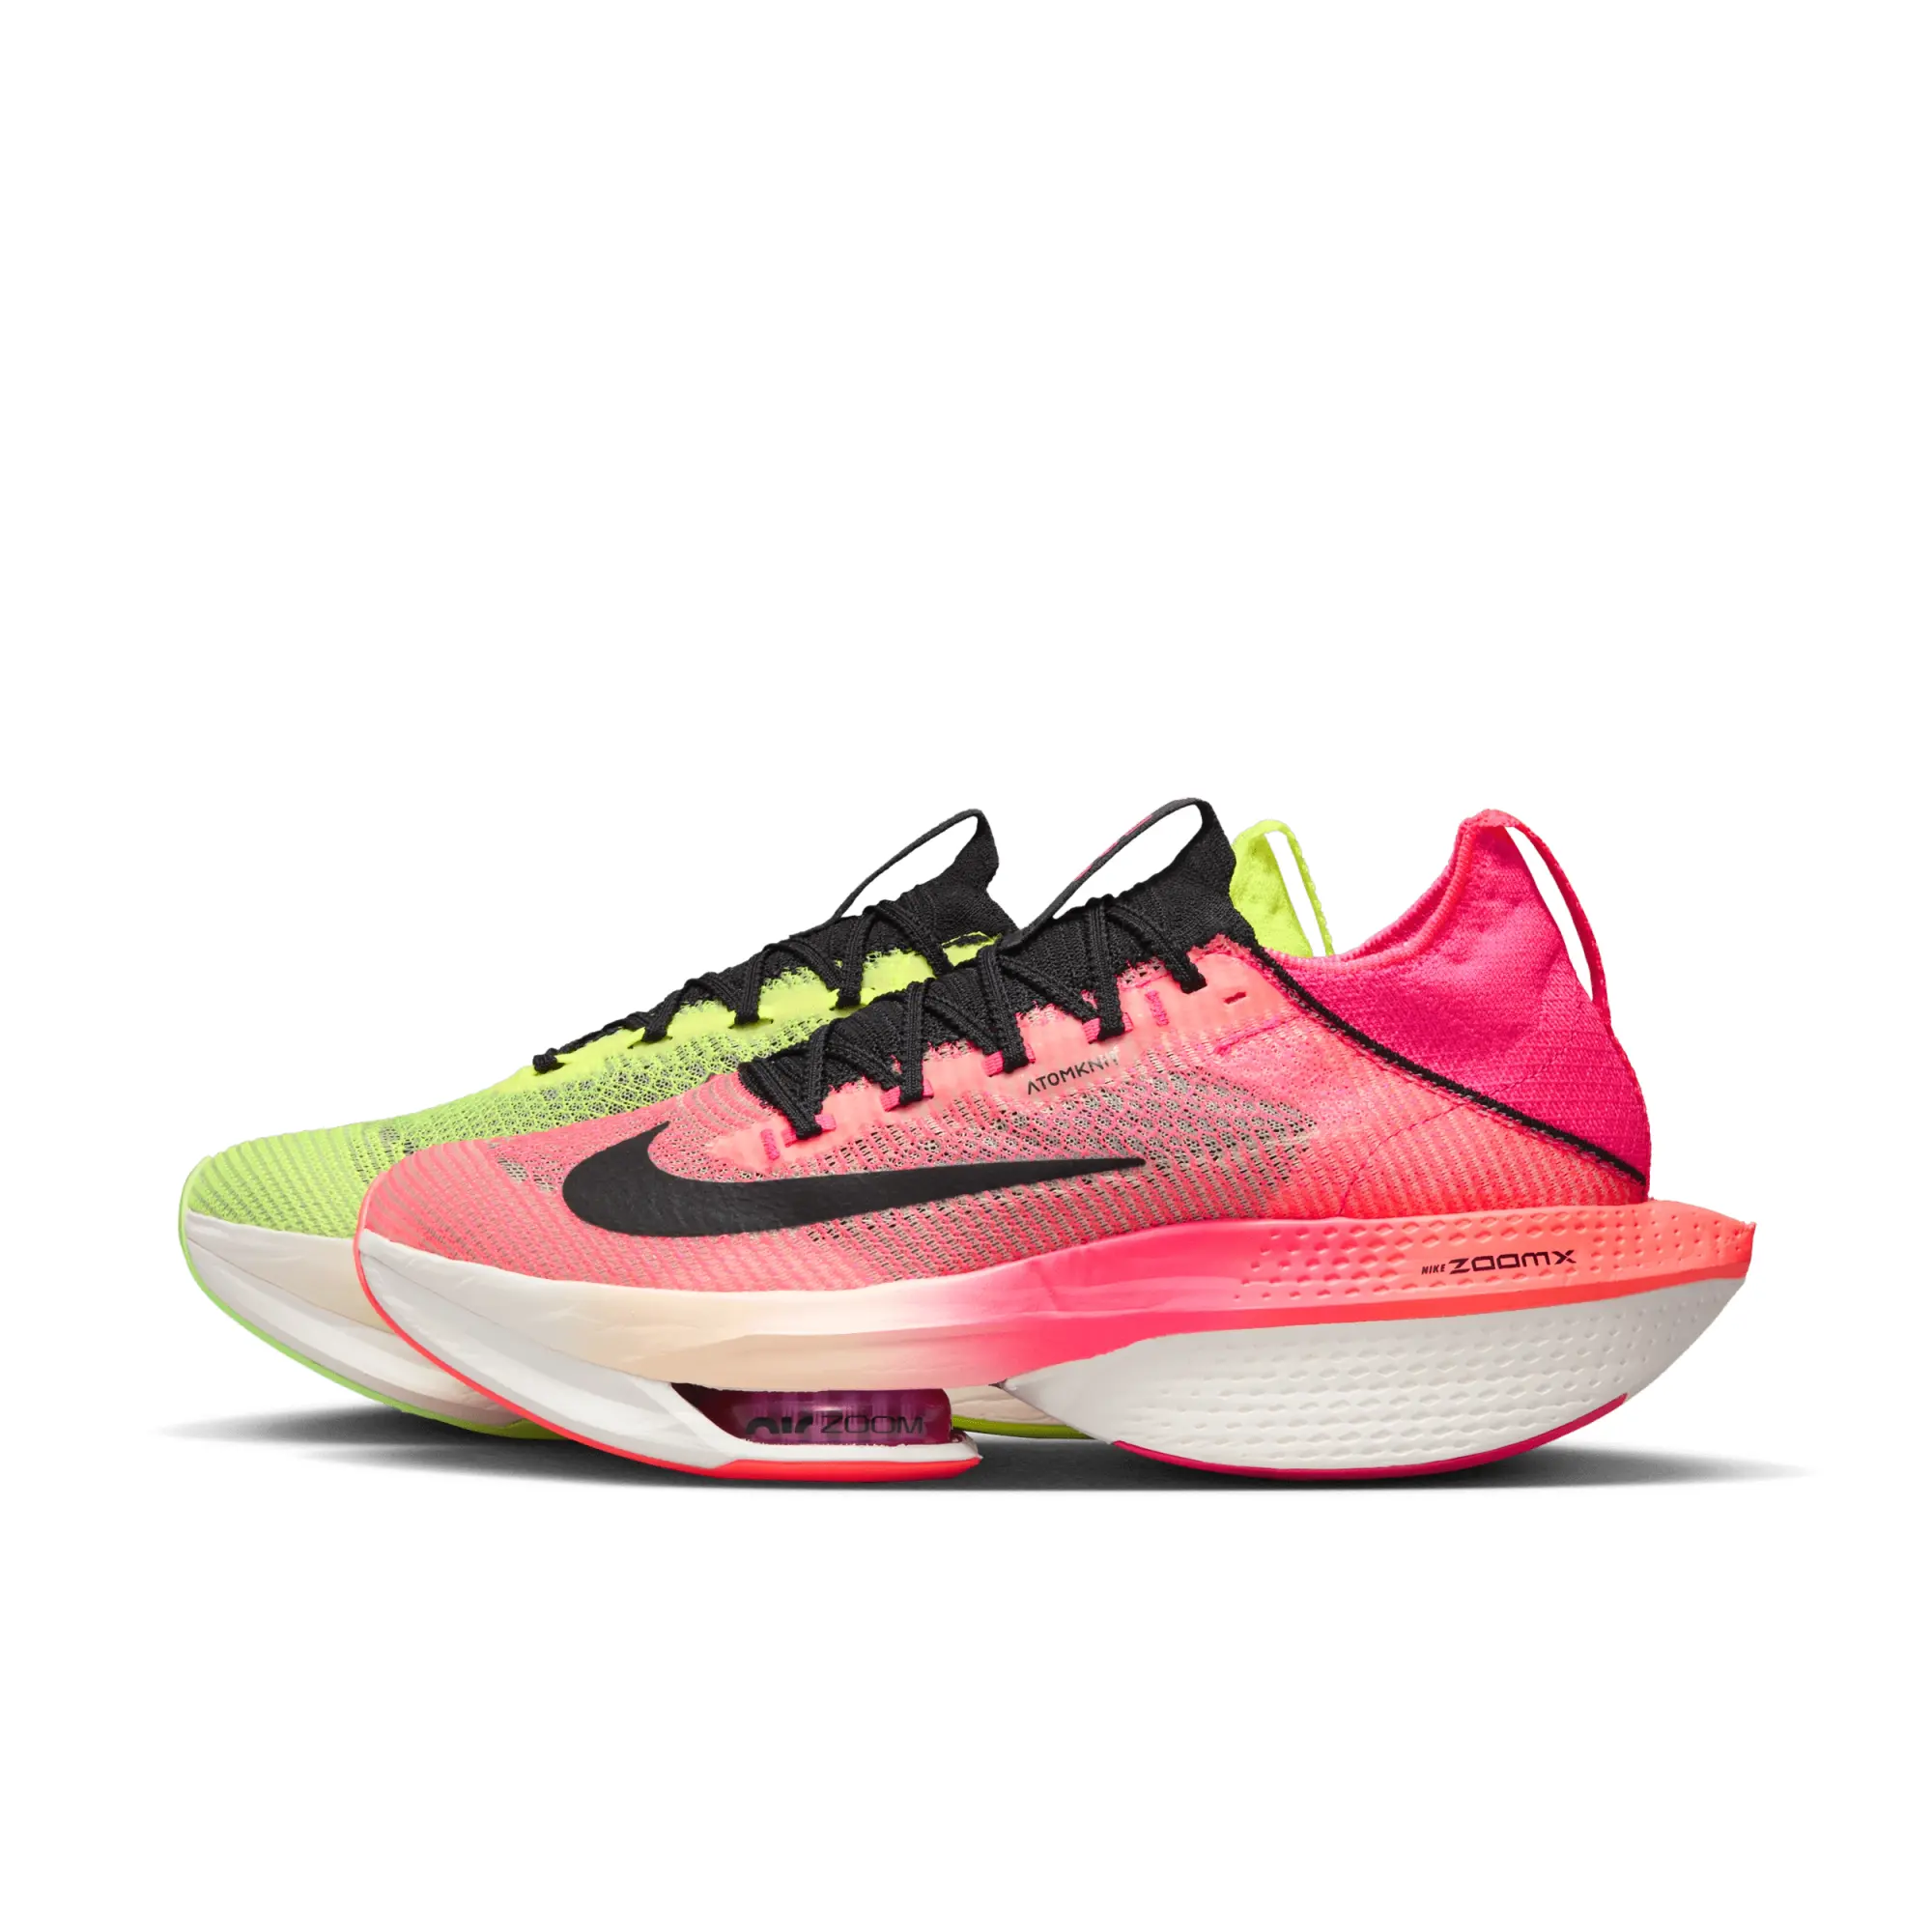 Nike Air Zoom Alphafly Next% Fk 2 Men Lowtop|Performance & Sports Green|Pink